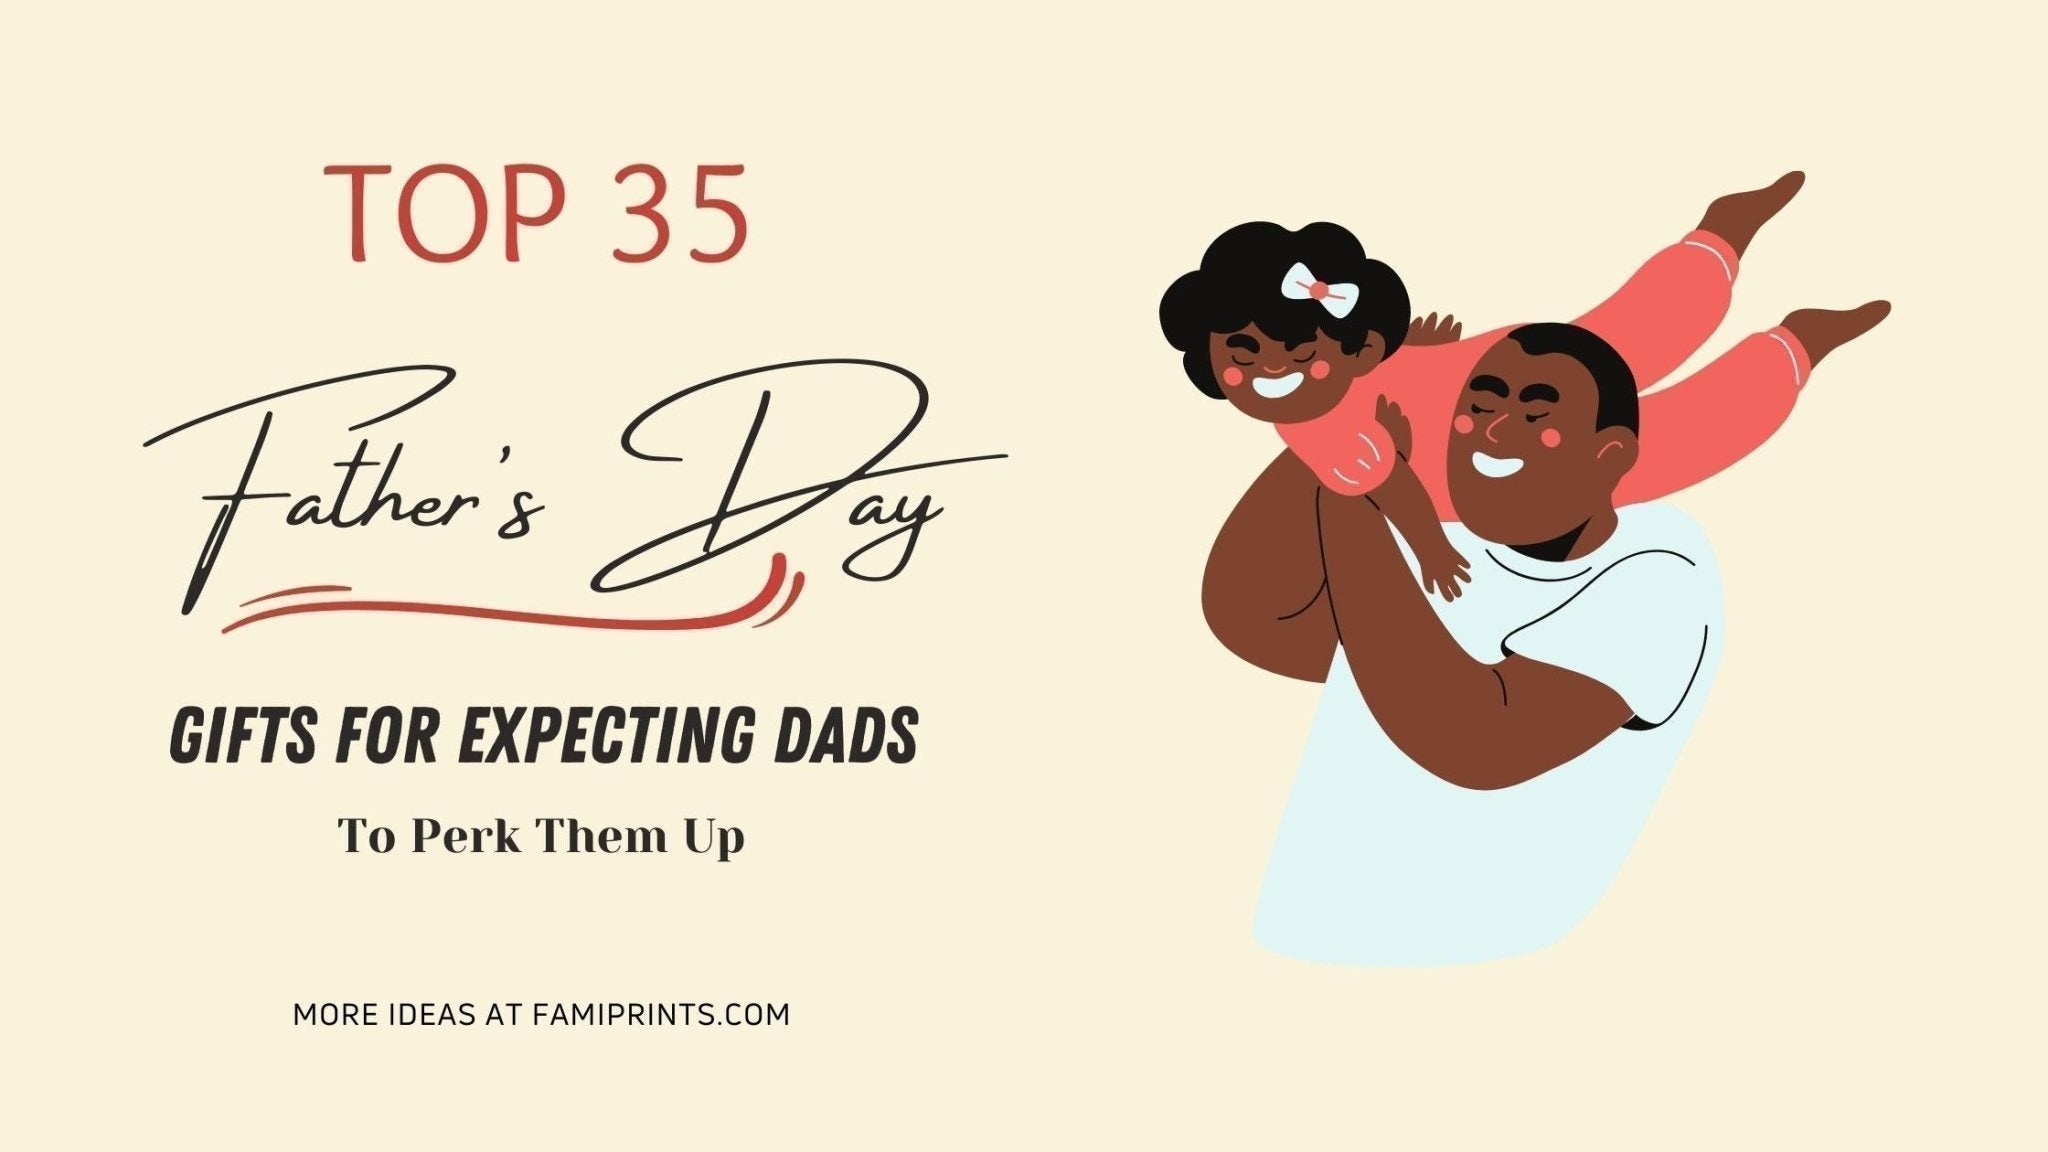 The Ultimate Father's Day Gift Guide: 10 Unique Ideas for Every Dad